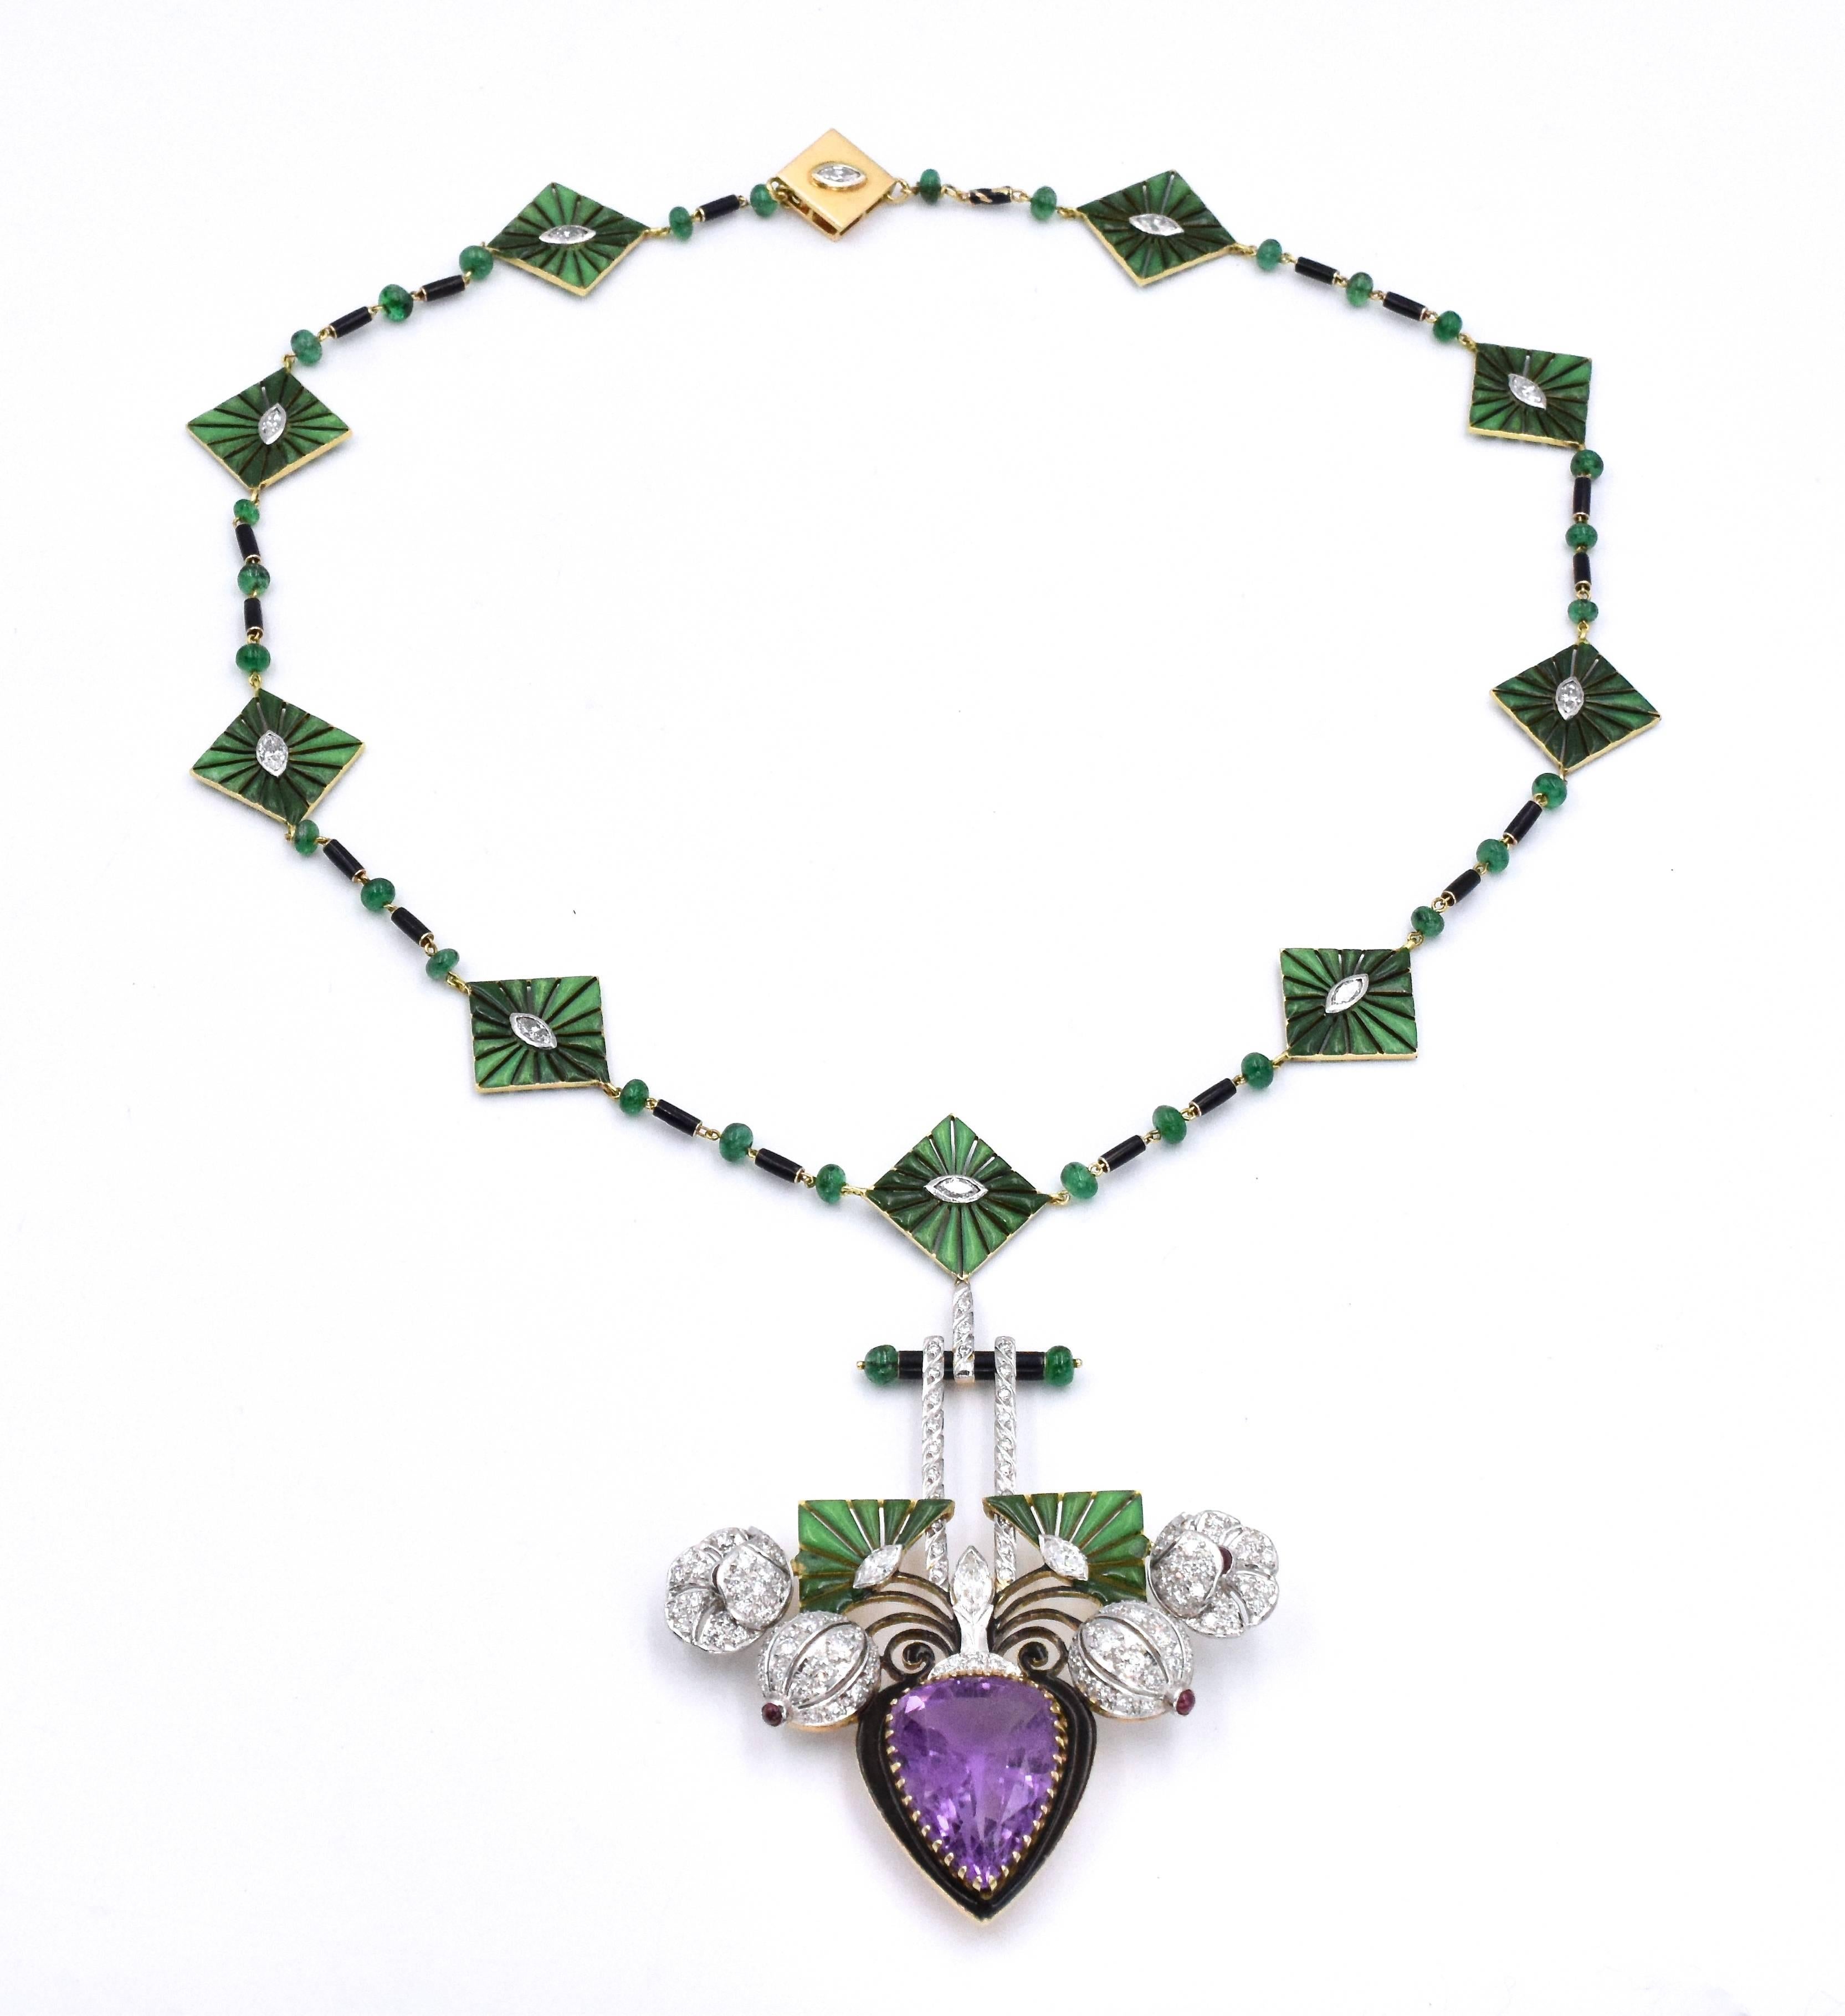 Exquisite  Necklace!

The chain is composed of 9 gold and enamel segments, each centered with marquise shaped diamond, alternating emerald rondelles and black enamel bars.

Center piece is a pear shaped amethyst hanging from a enamel bar 